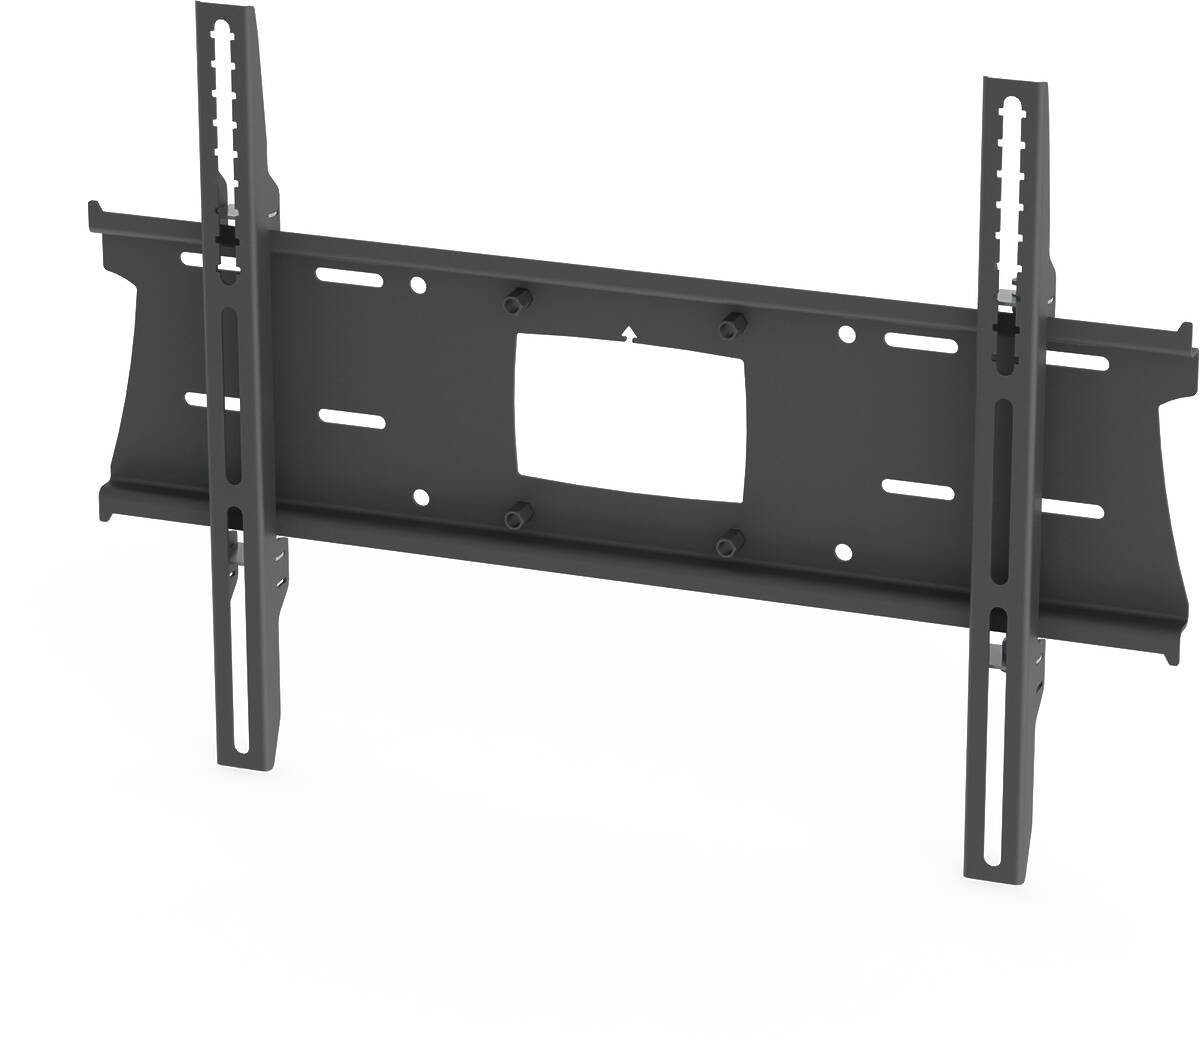 Unicol PZX1 Pozimount VESA wall mount for monitors and TVs from 33 to 70 inches product image. Click to enlarge.